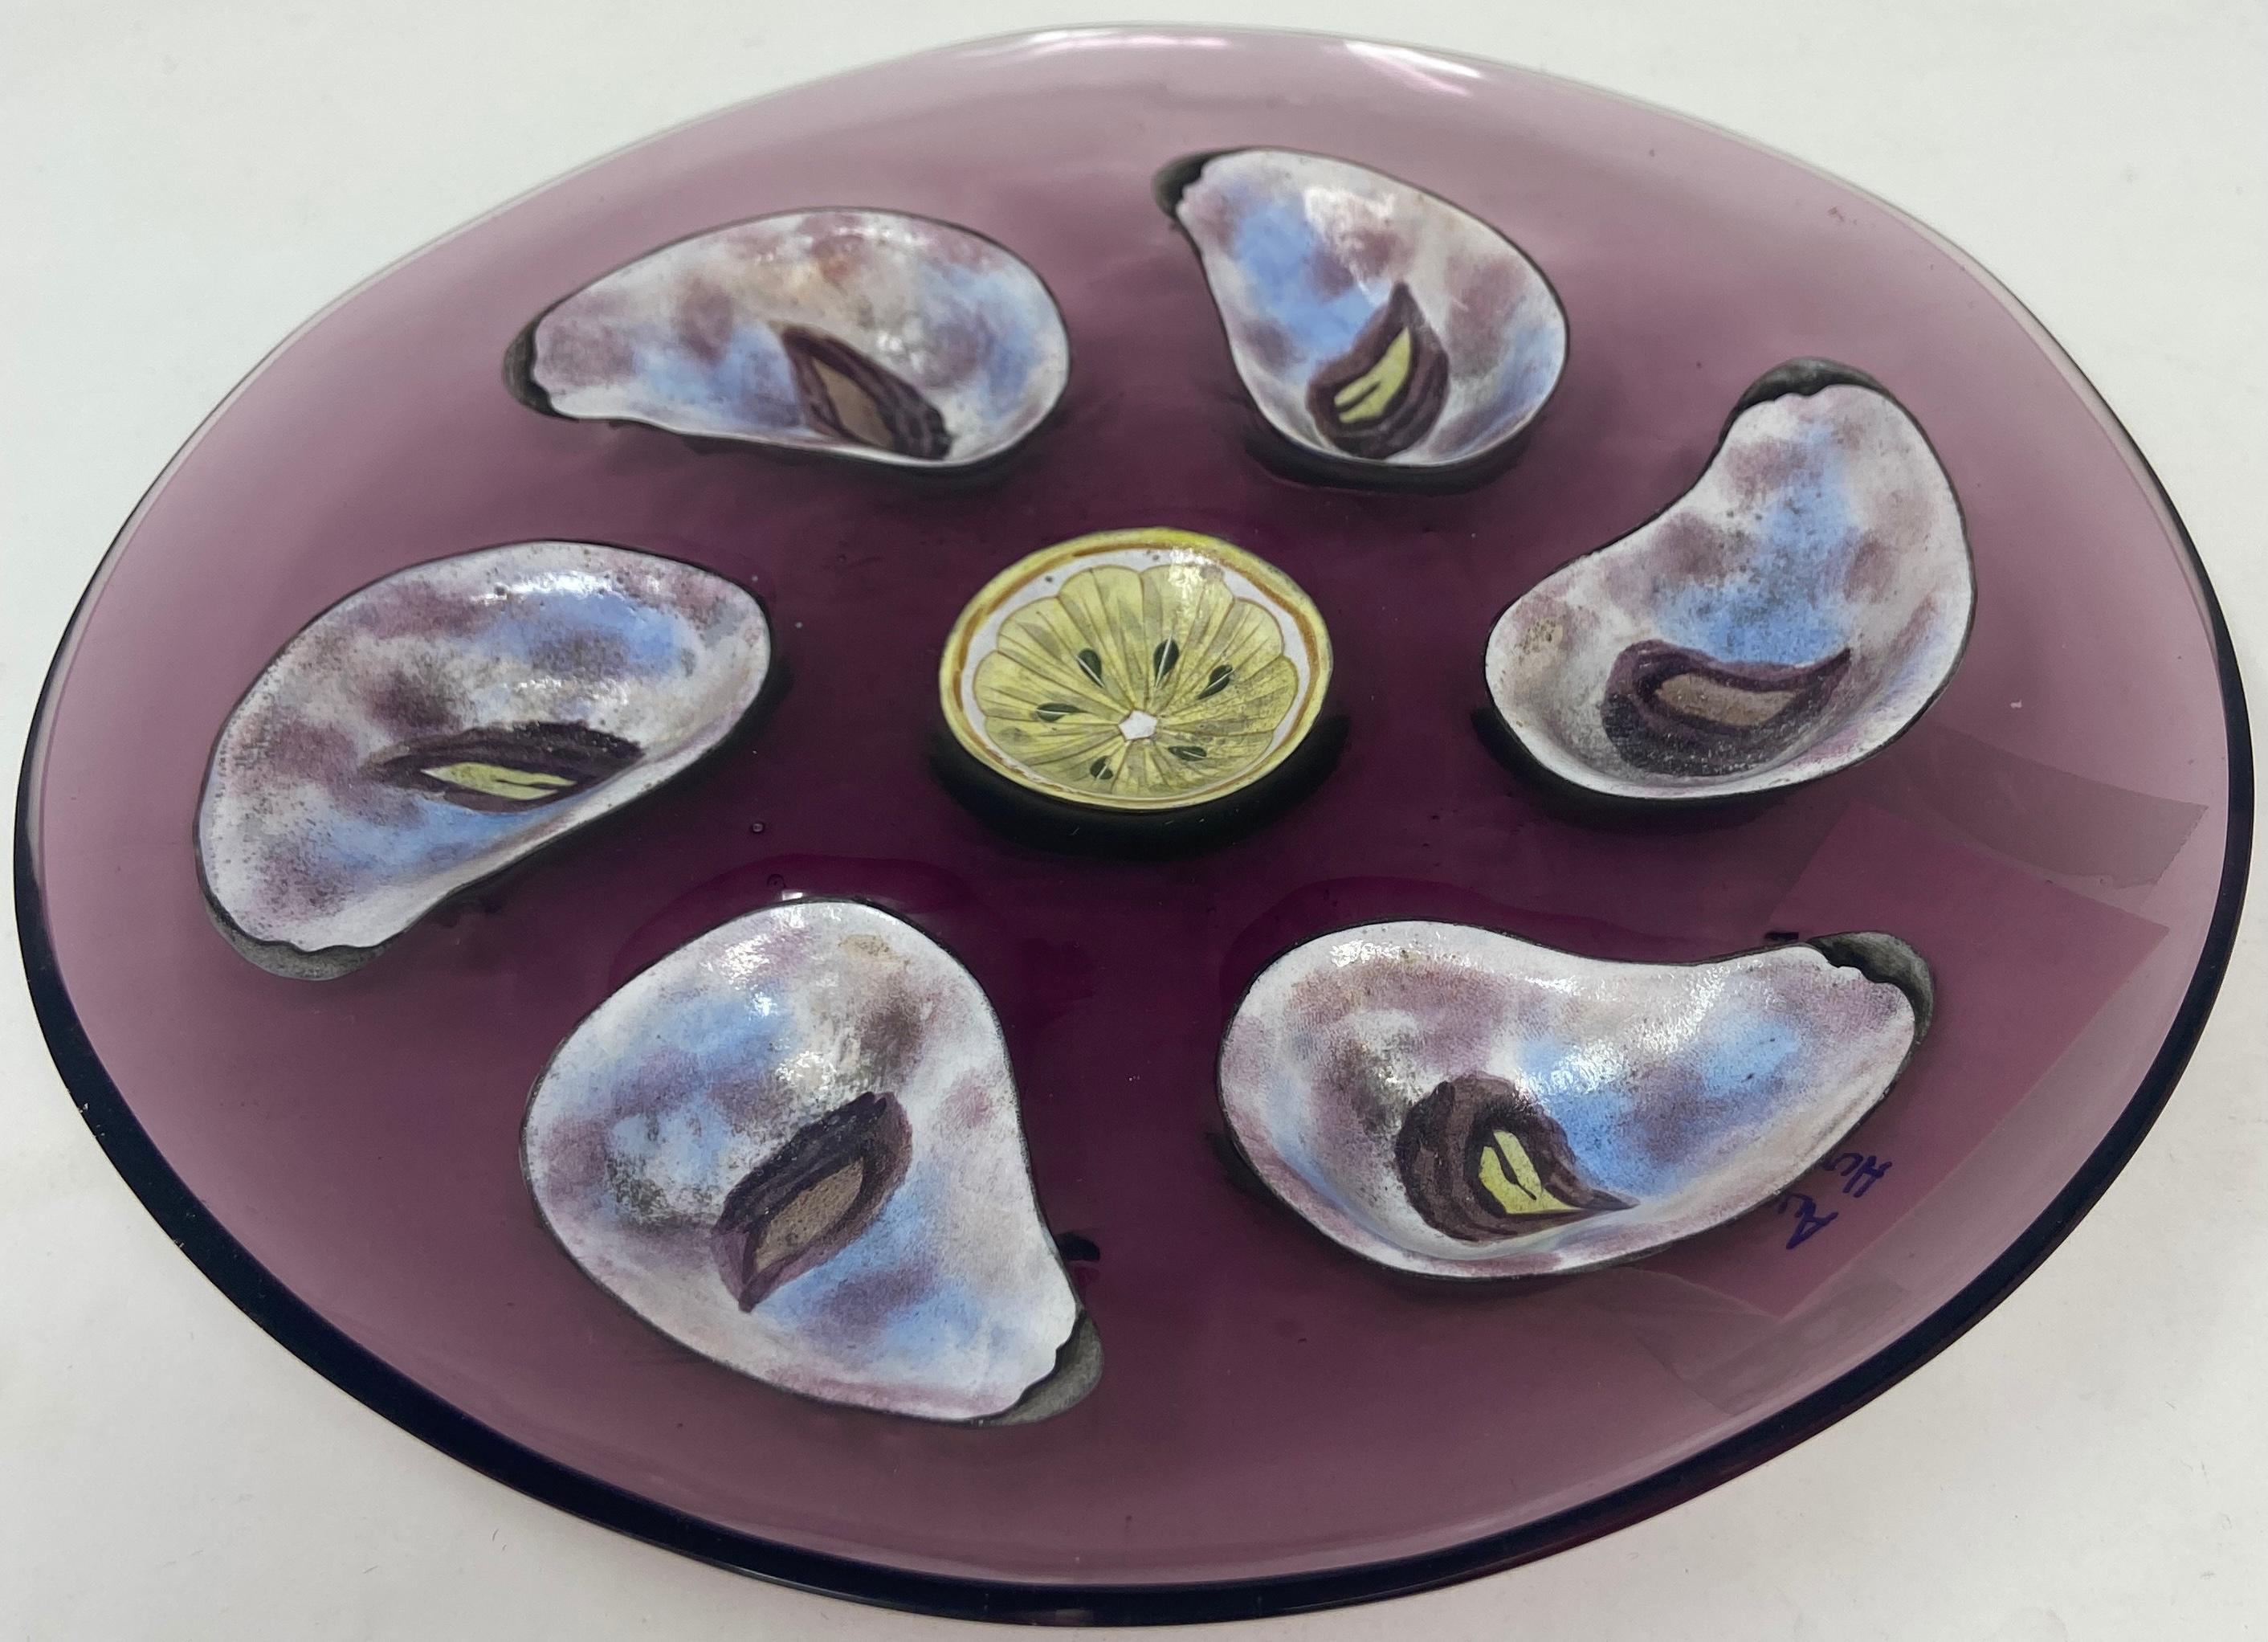 Very rare antique Bohemian Moser glass Oyster plate, purple glass with multi-colored polychrome enamel, Circa 1880-1890. This one is for the collector's--the pinnacle of oyster plates as its rarity surpasses even the coveted Presidential plate.